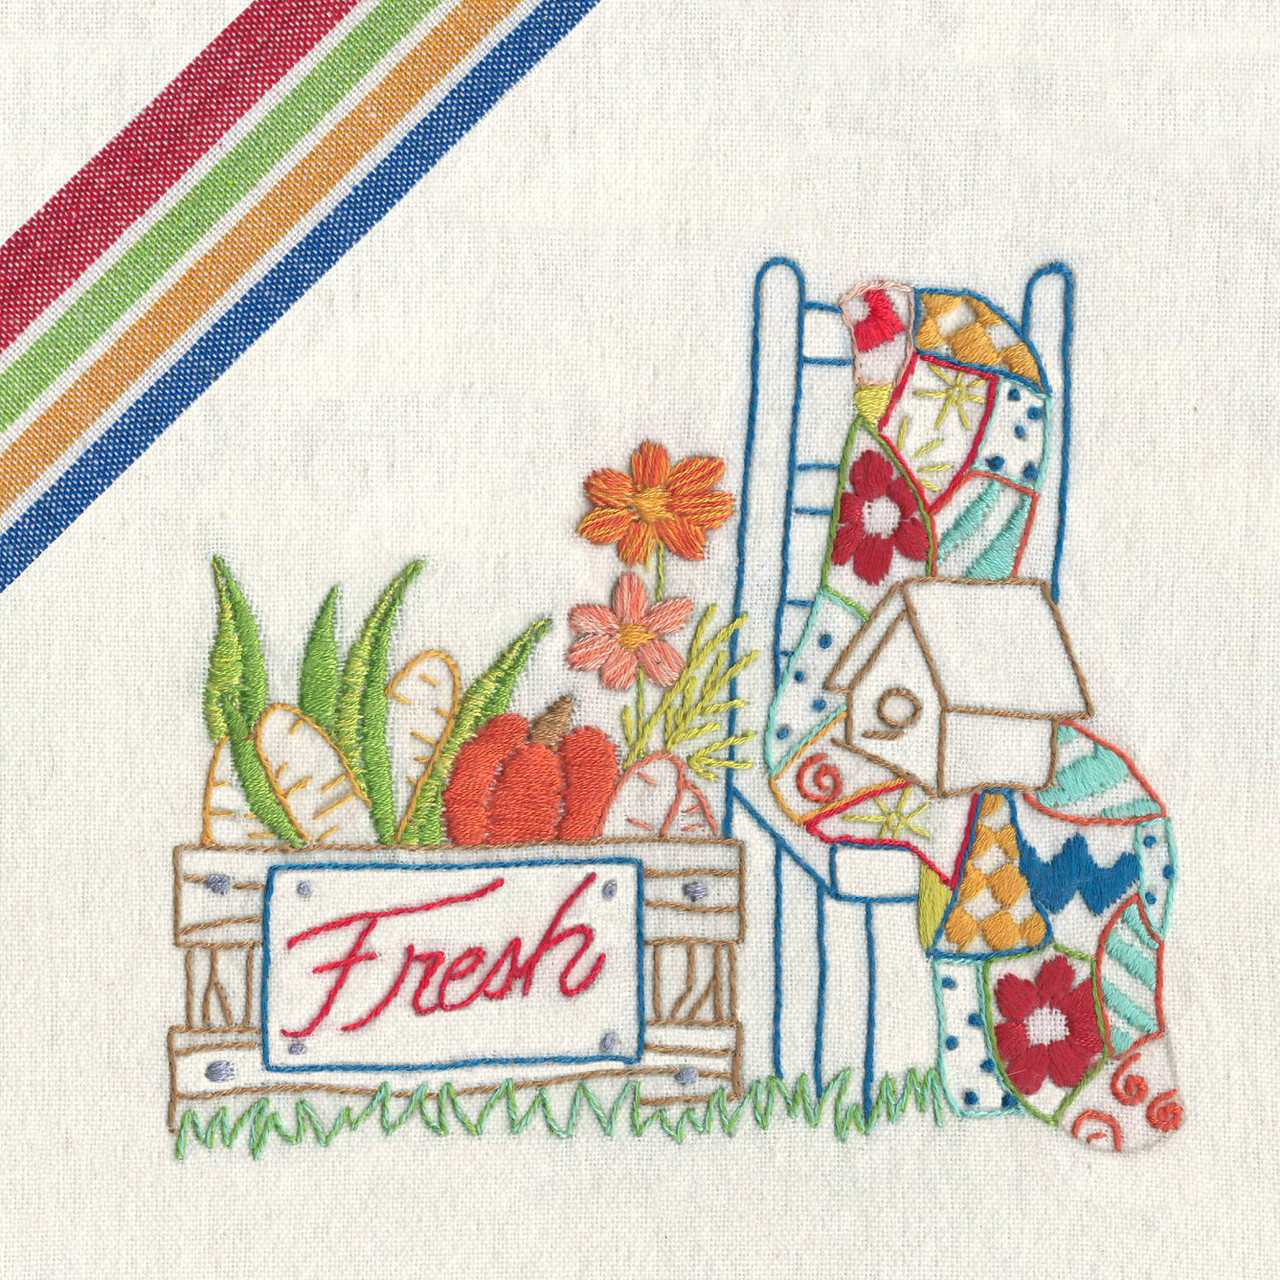 Kitchen Dish Towel with Farmers Market Sign Embroidery Design, Made in the  USA